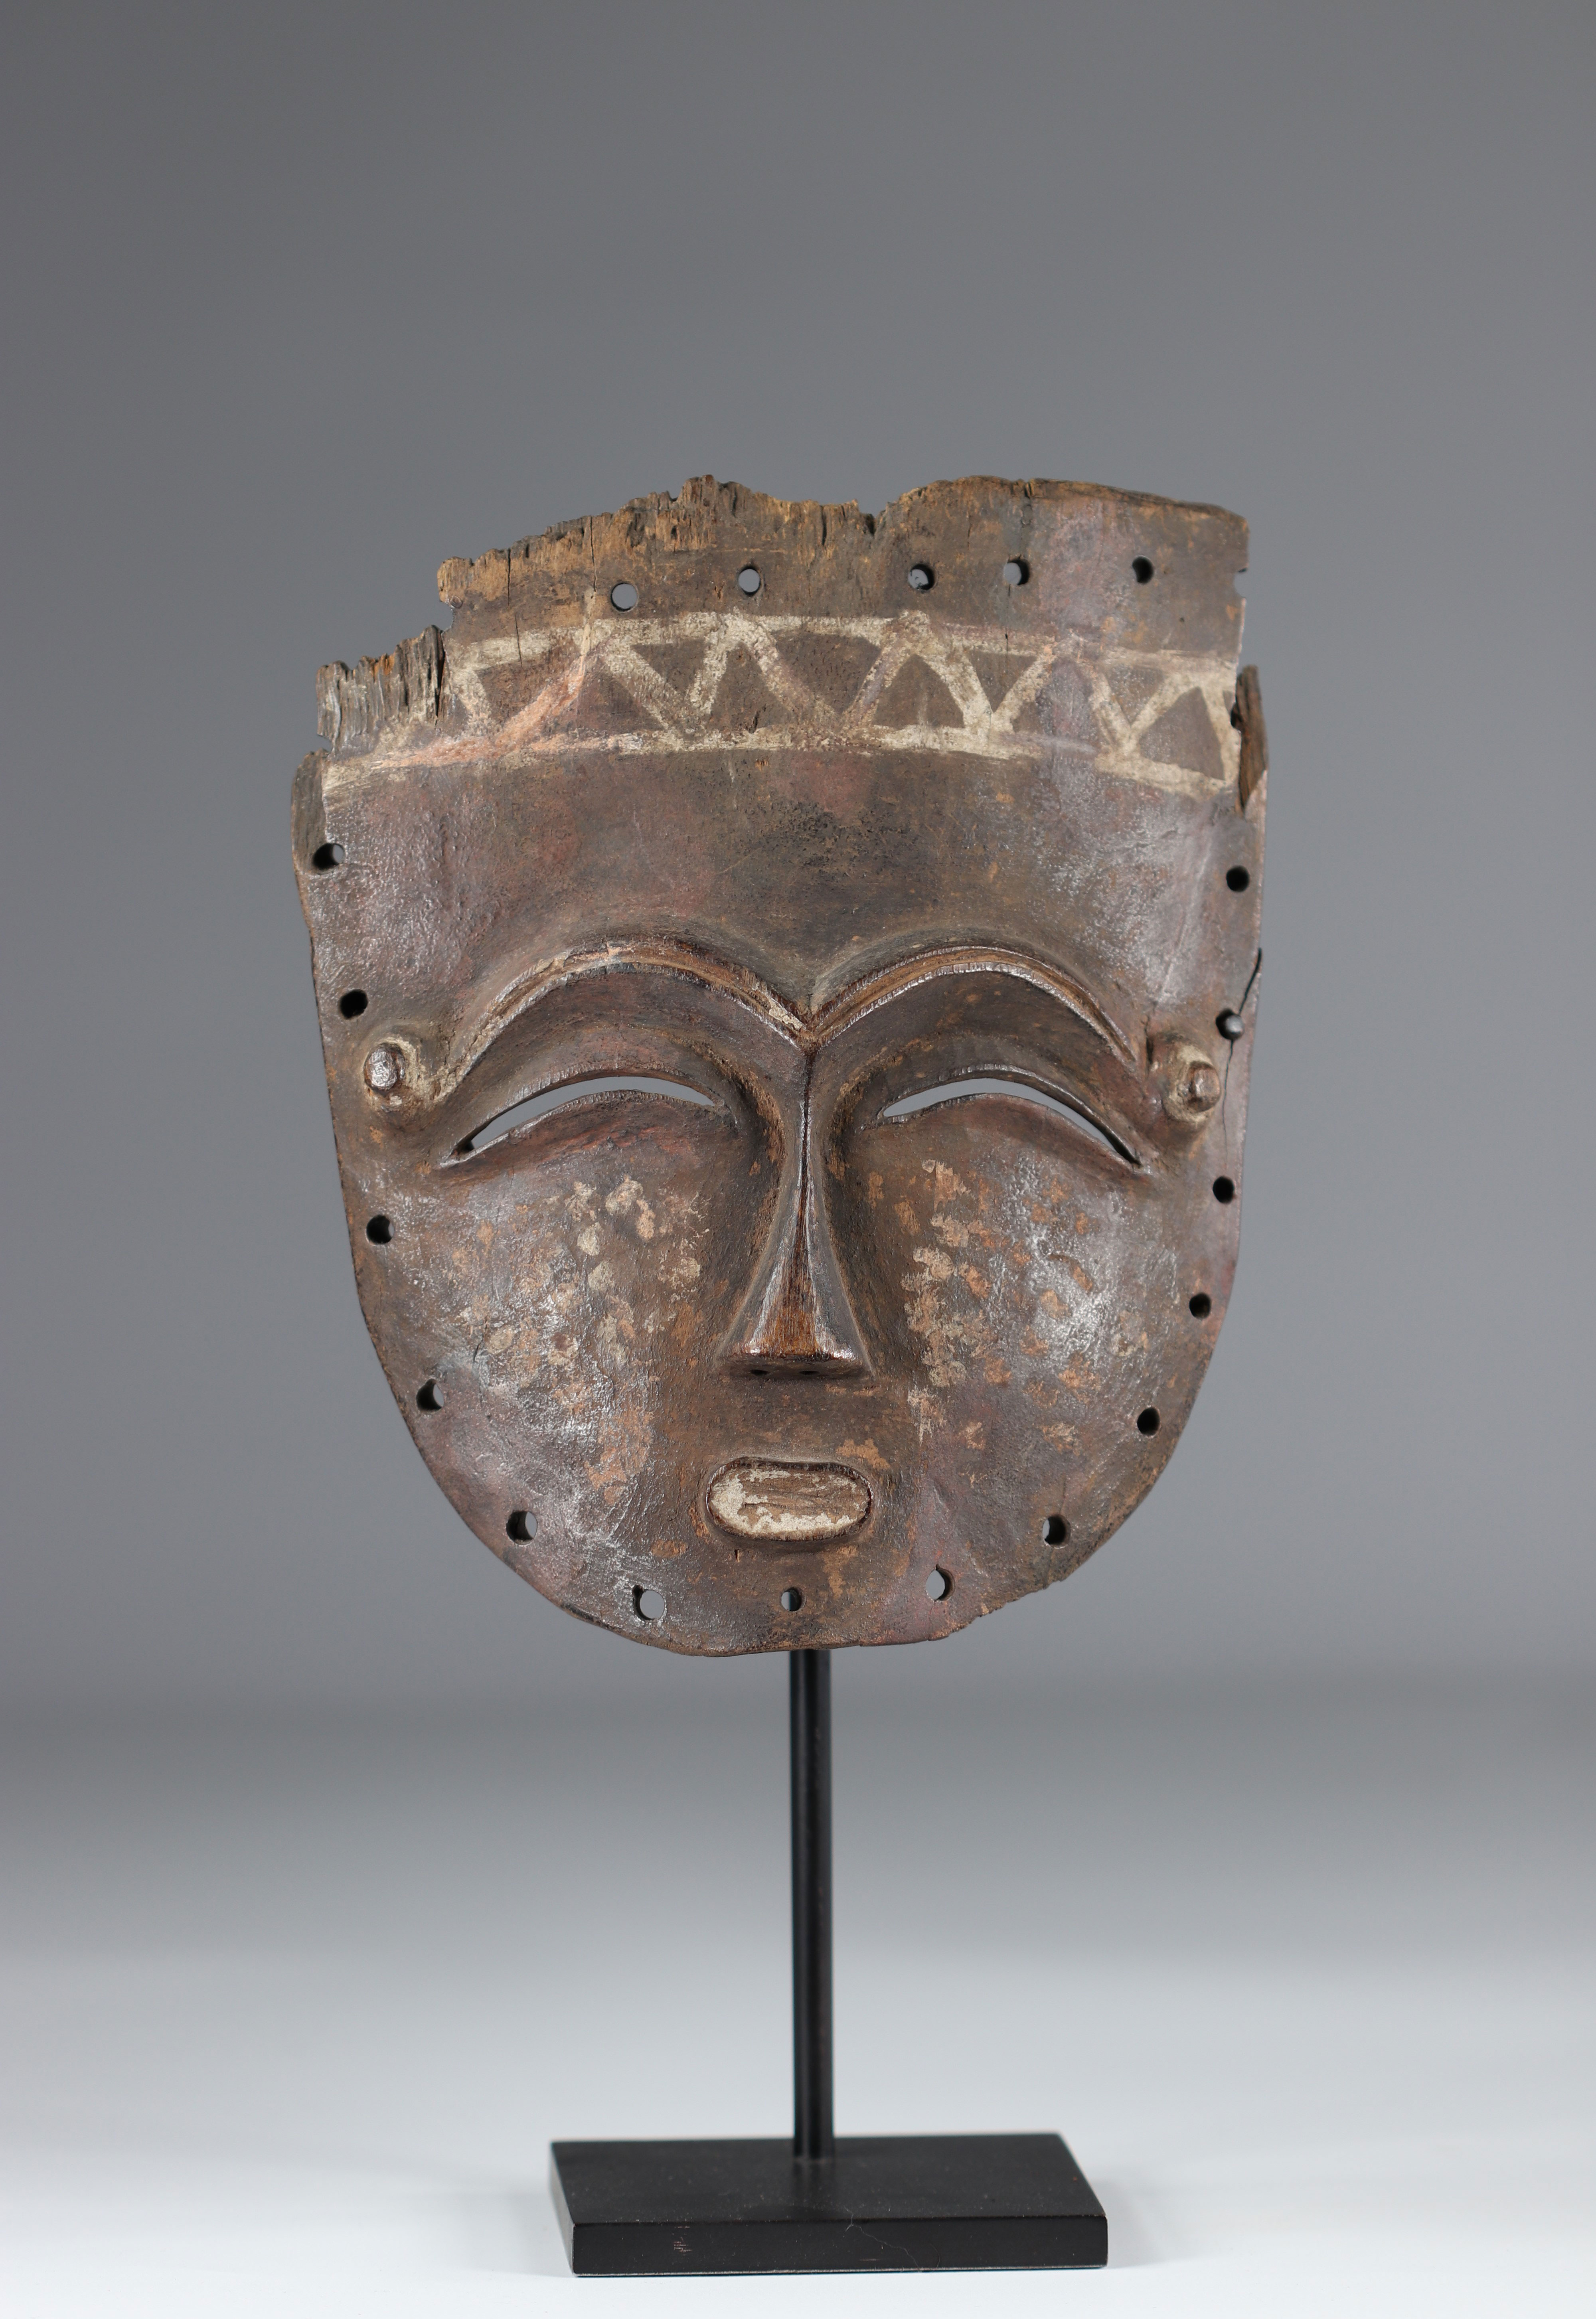 Rare and very old Lele mask - DRC, traces of use, natural pigments from the early 20th century